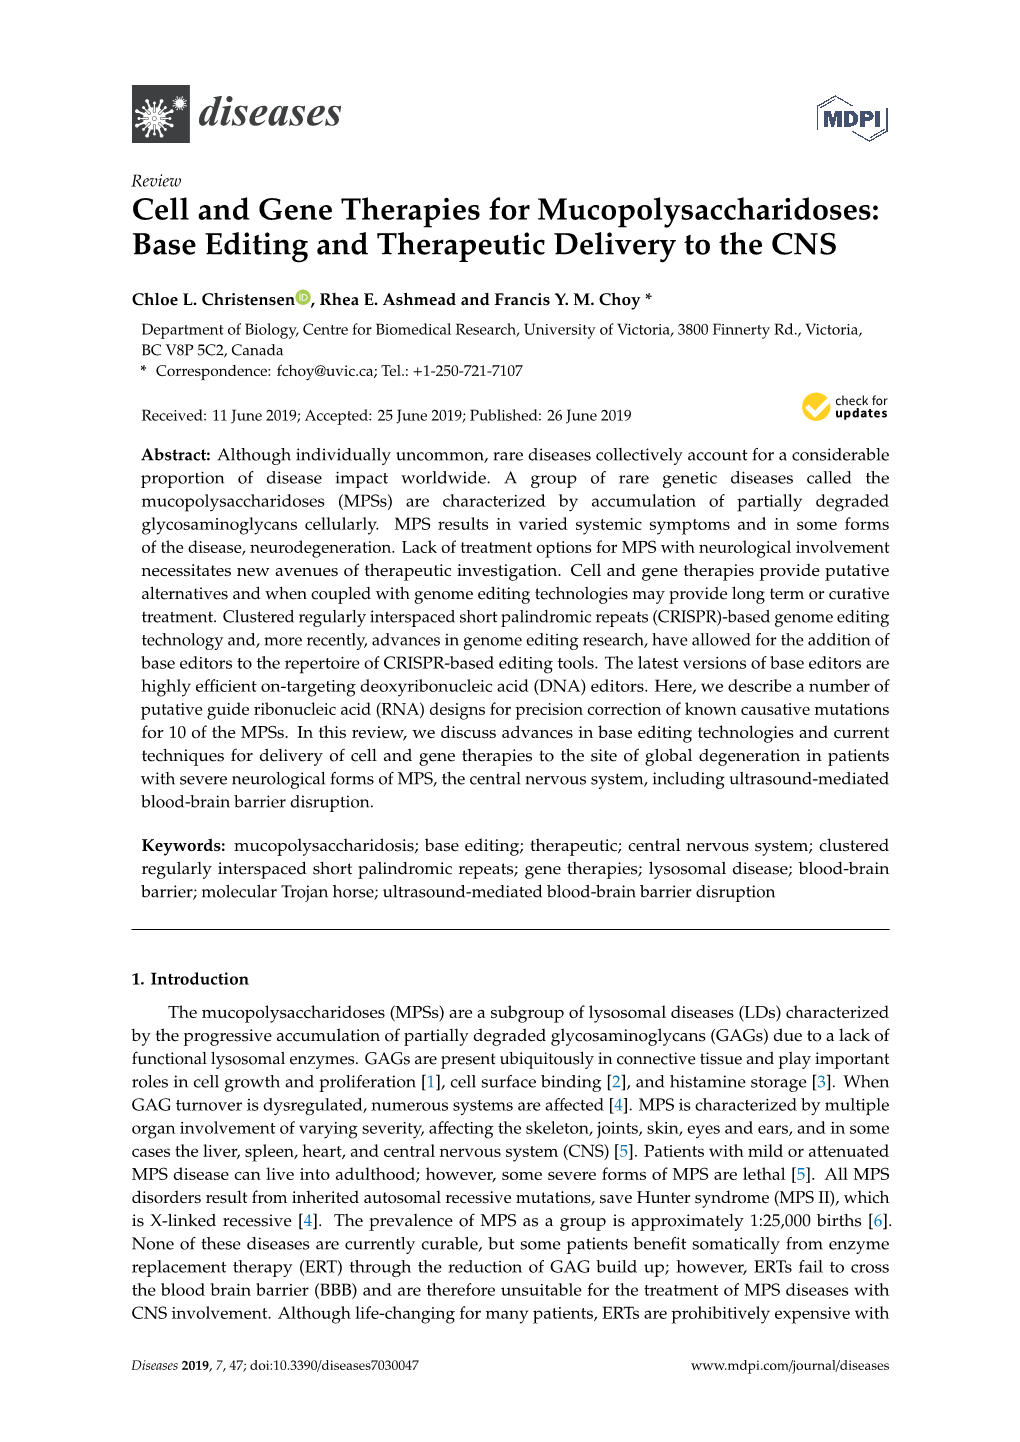 Cell and Gene Therapies for Mucopolysaccharidoses: Base Editing and Therapeutic Delivery to the CNS